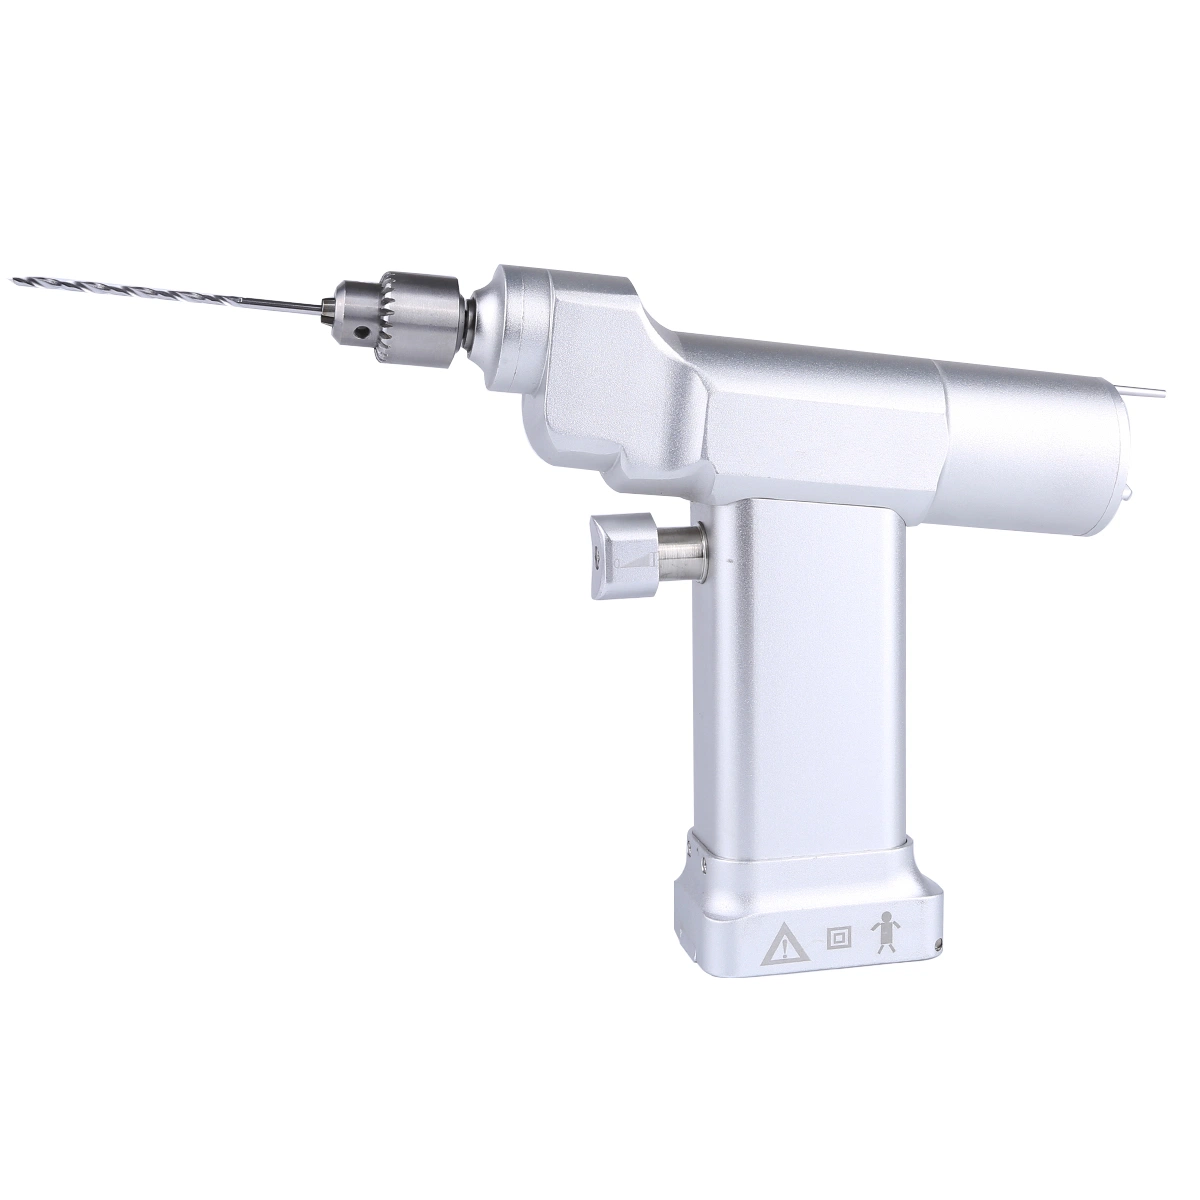 Orthopaedic Surgical Instruments Medical Power Tools Electric Small Hand Cannulated Bone Drill with Battery